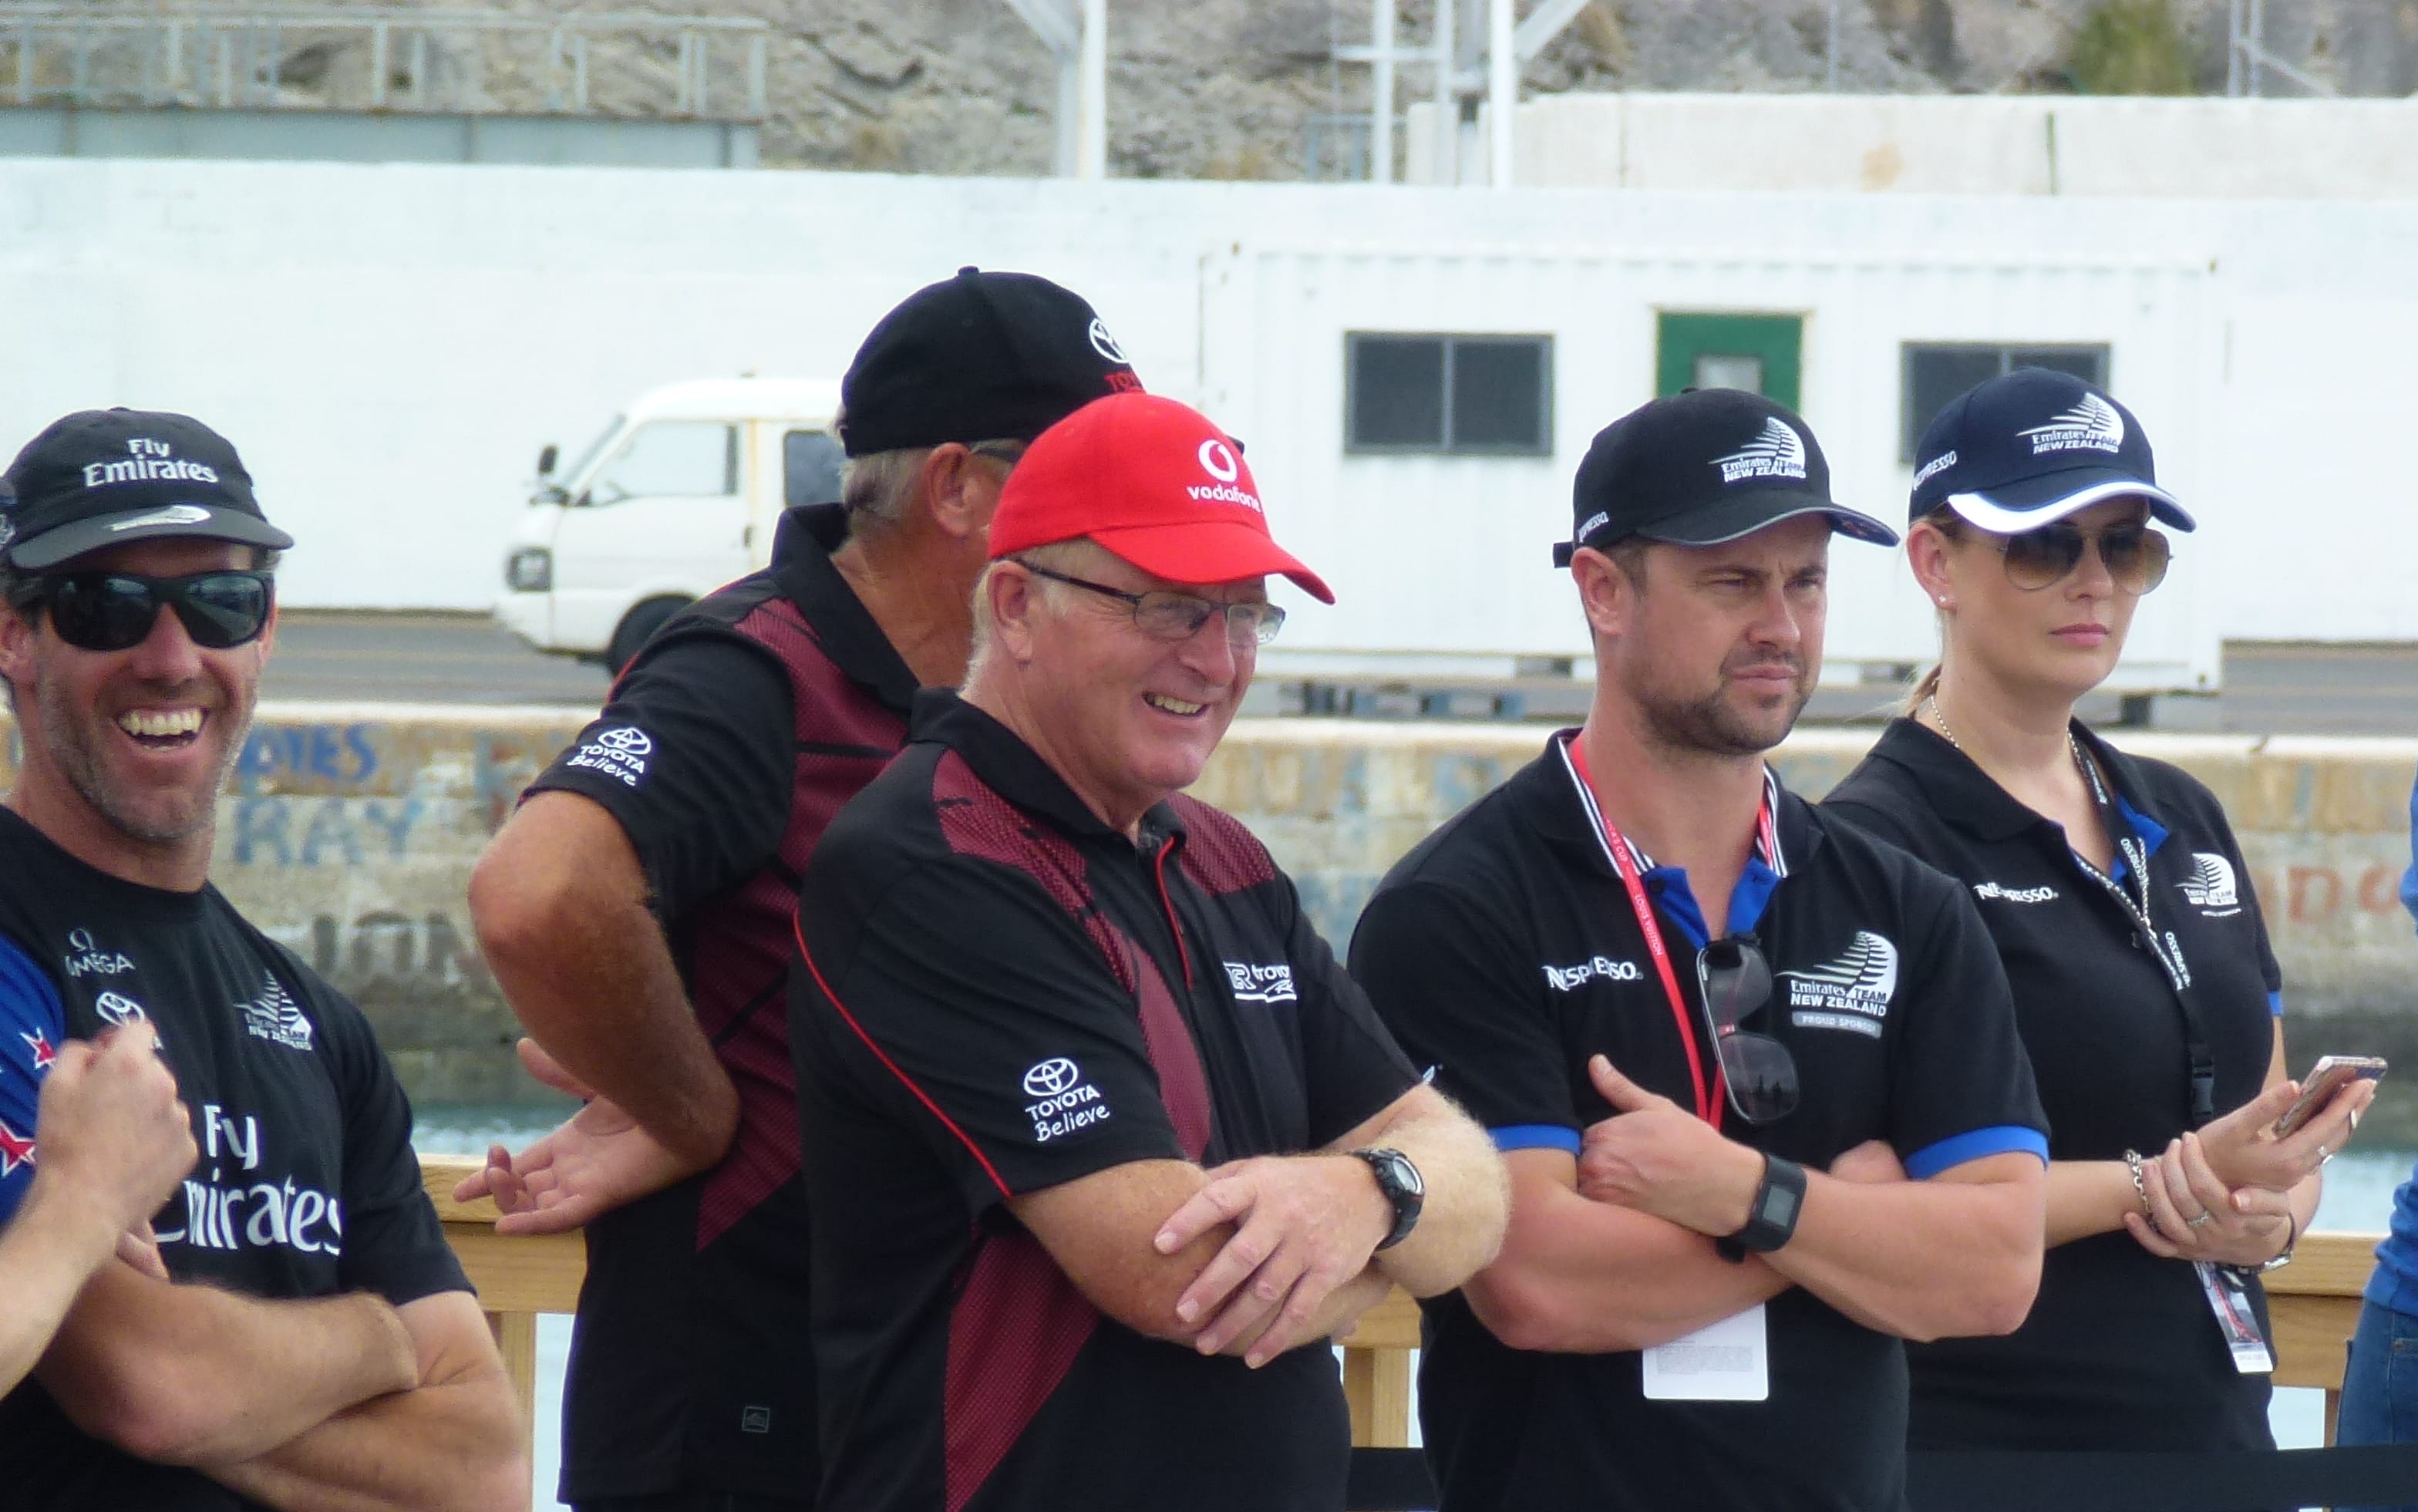 Martin Tasker, Peter Lester on the Toyota team; and Sam Wallace represnting Nespresso.